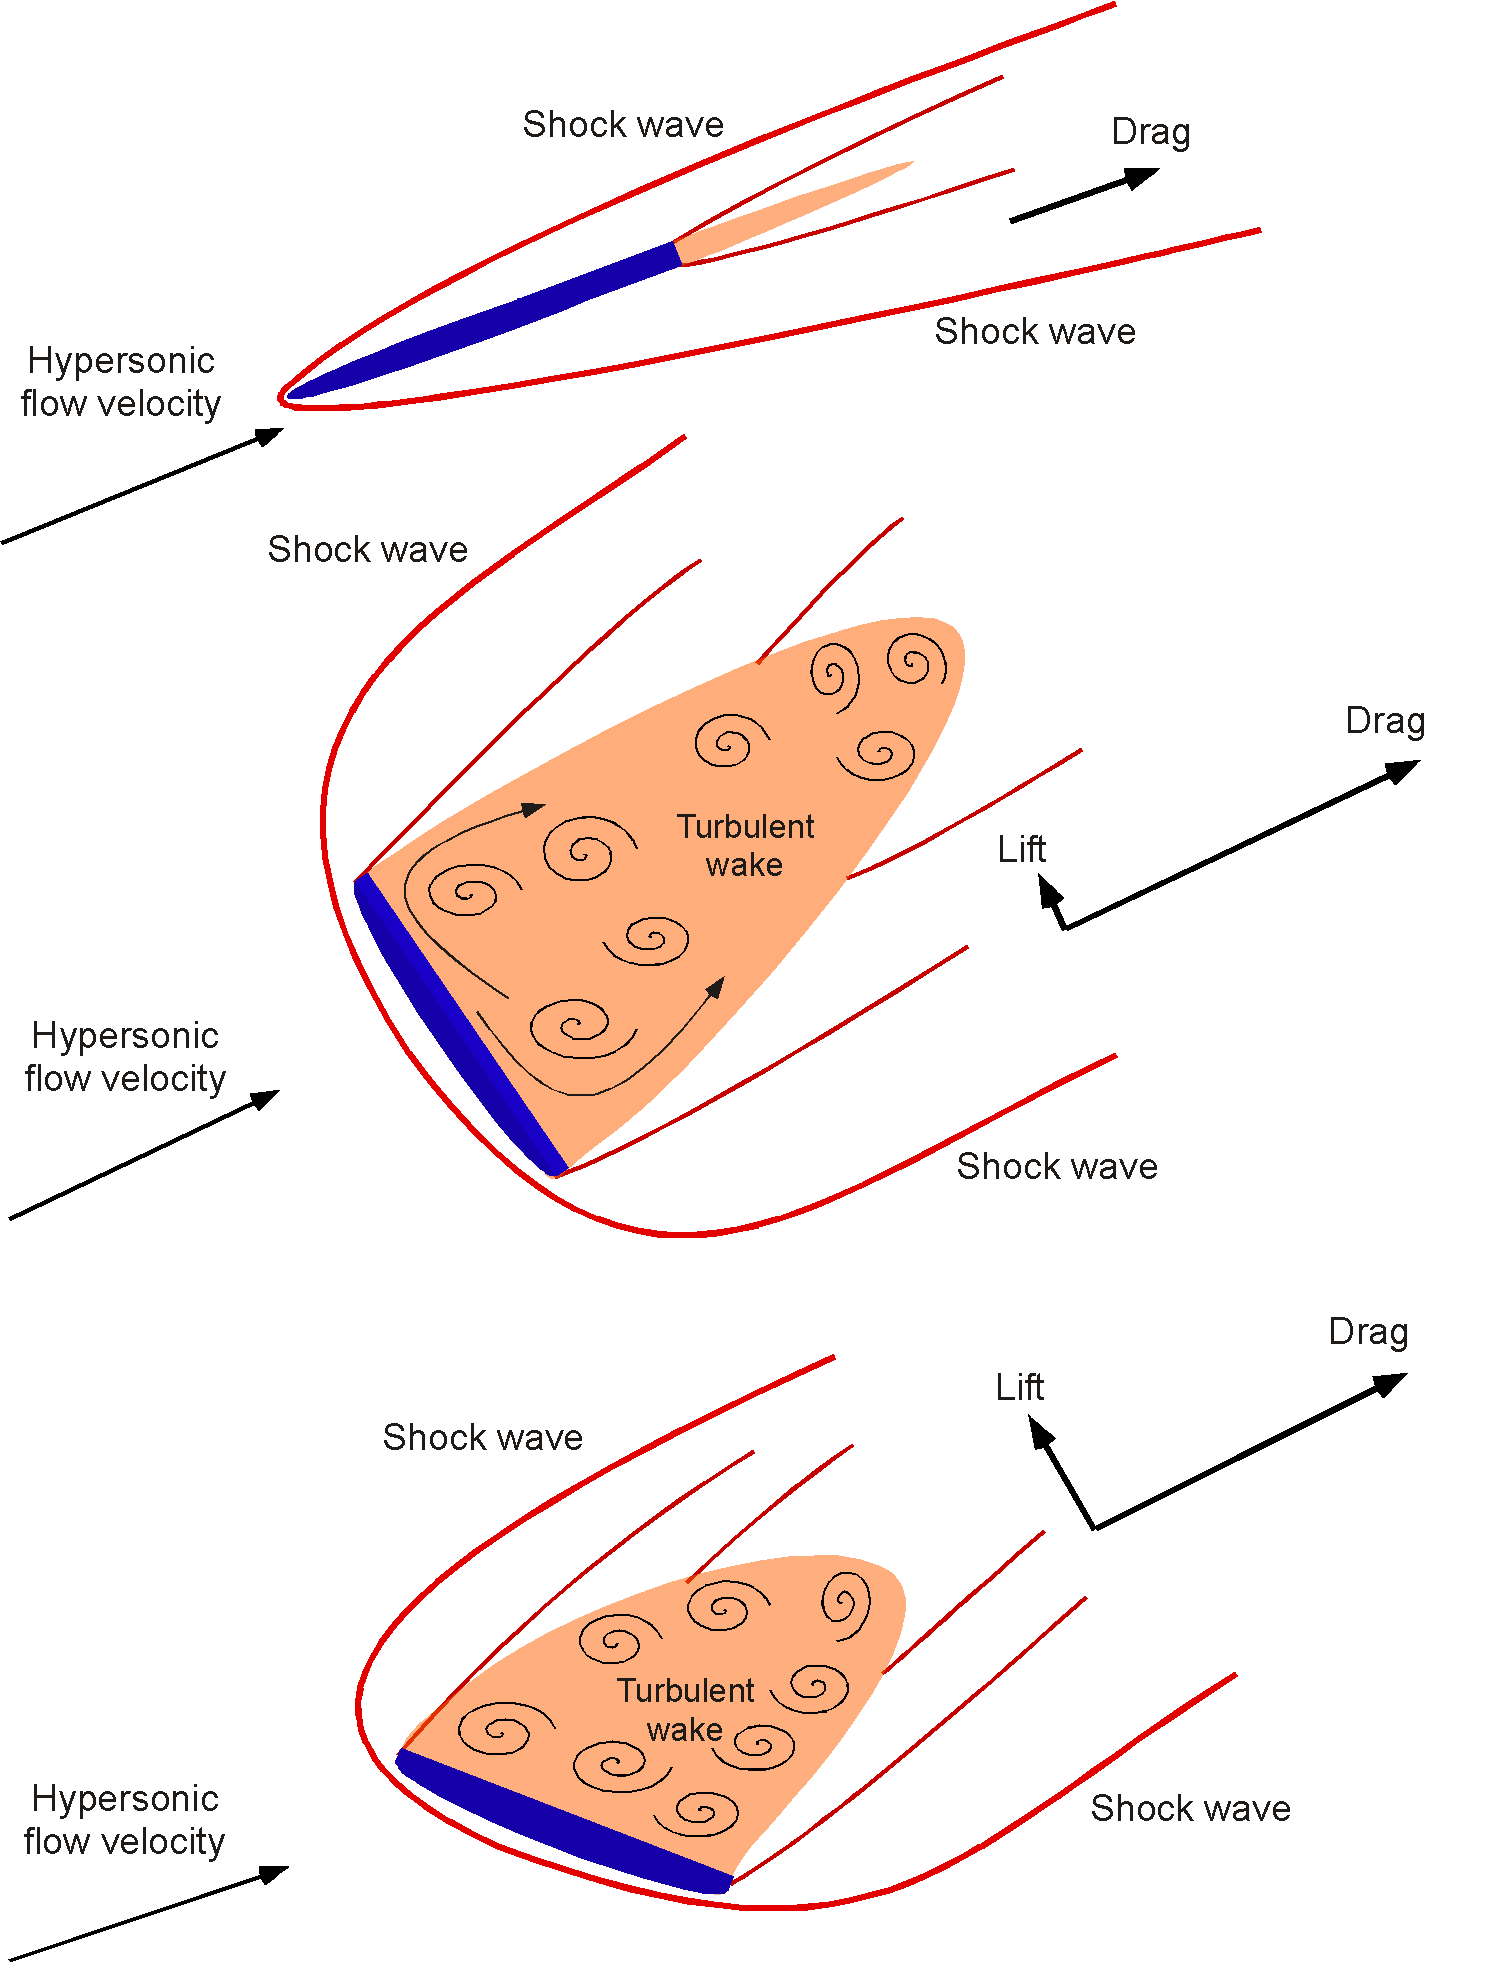 Diagram of different shapes of objects flying at hypersonic speeds at reentry and how flow velocity if affected.